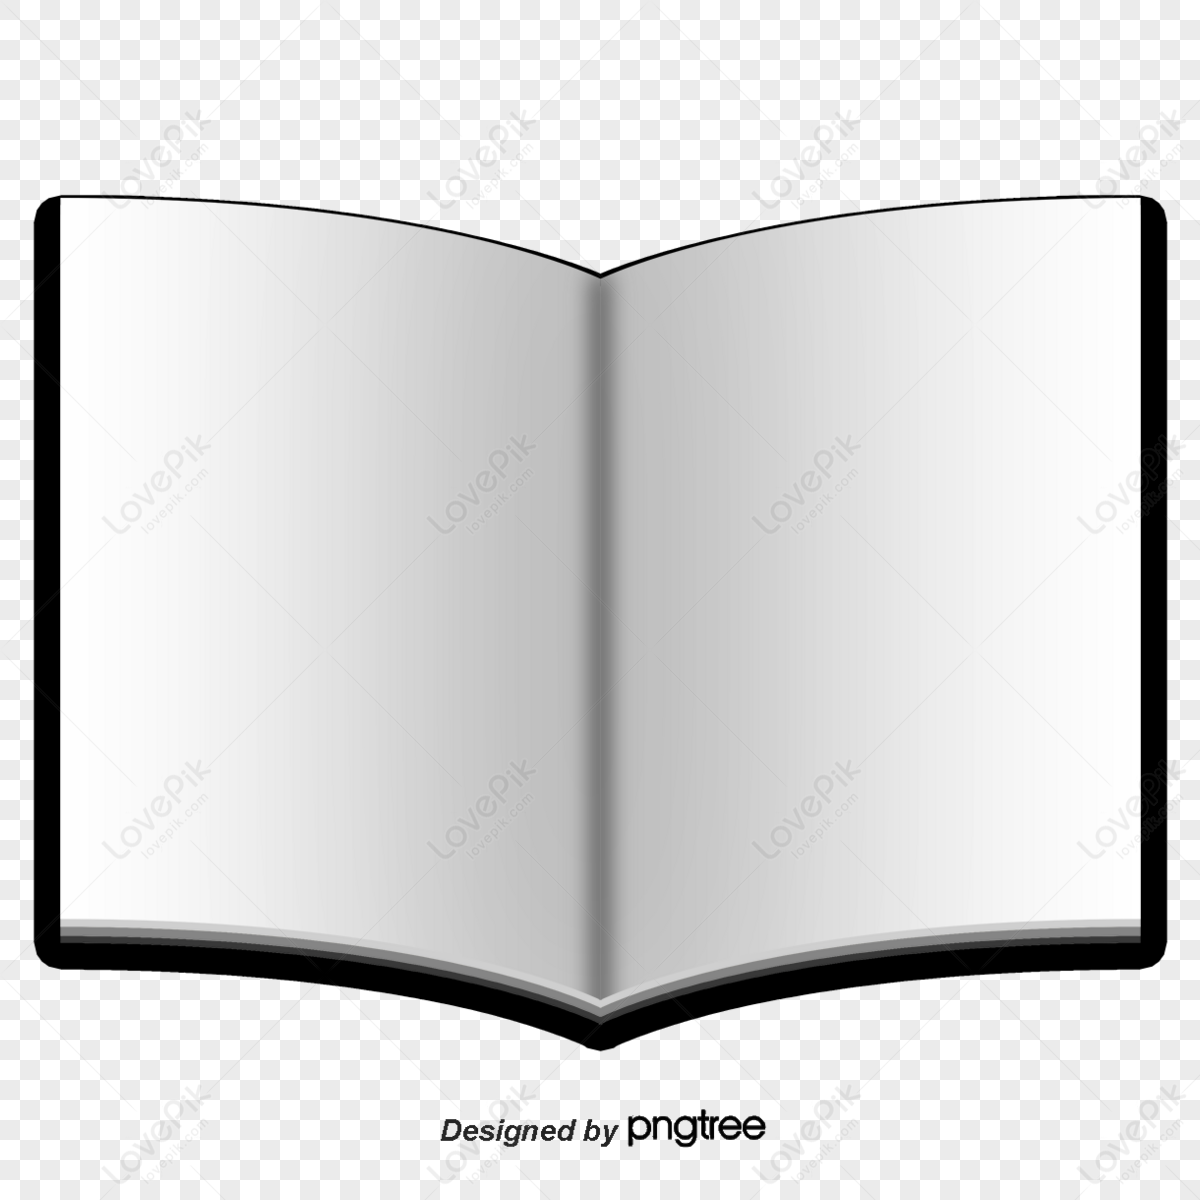 folio blank book design vector material,off books,blank books png image